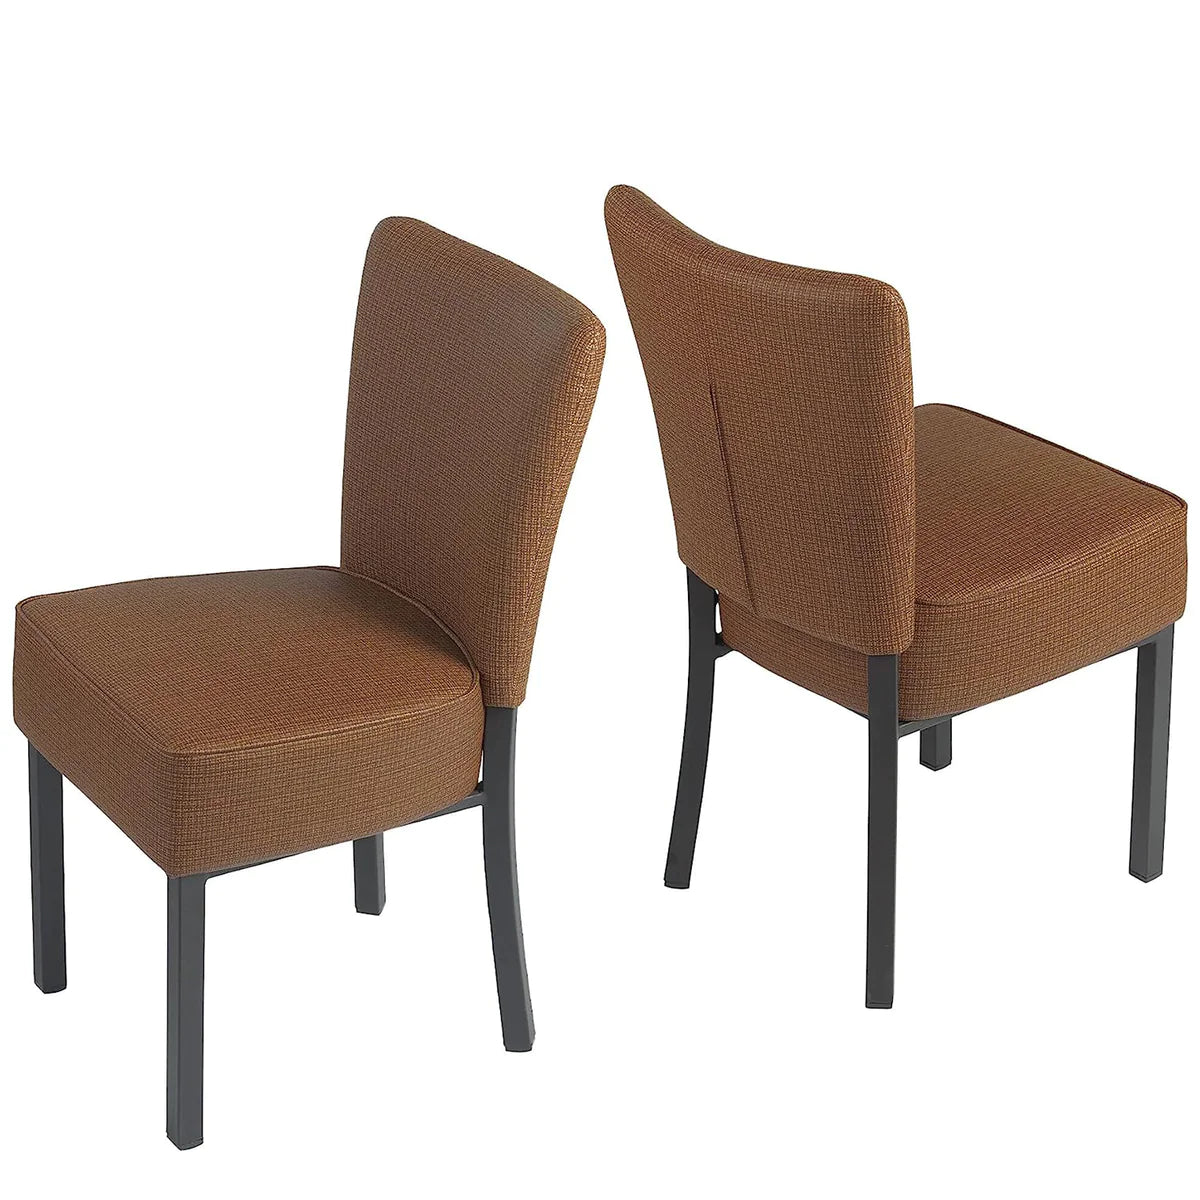 2 Set of Upholstered Chairs PU Leather Modern Dining Room Chairs, Soft, Multiple colors